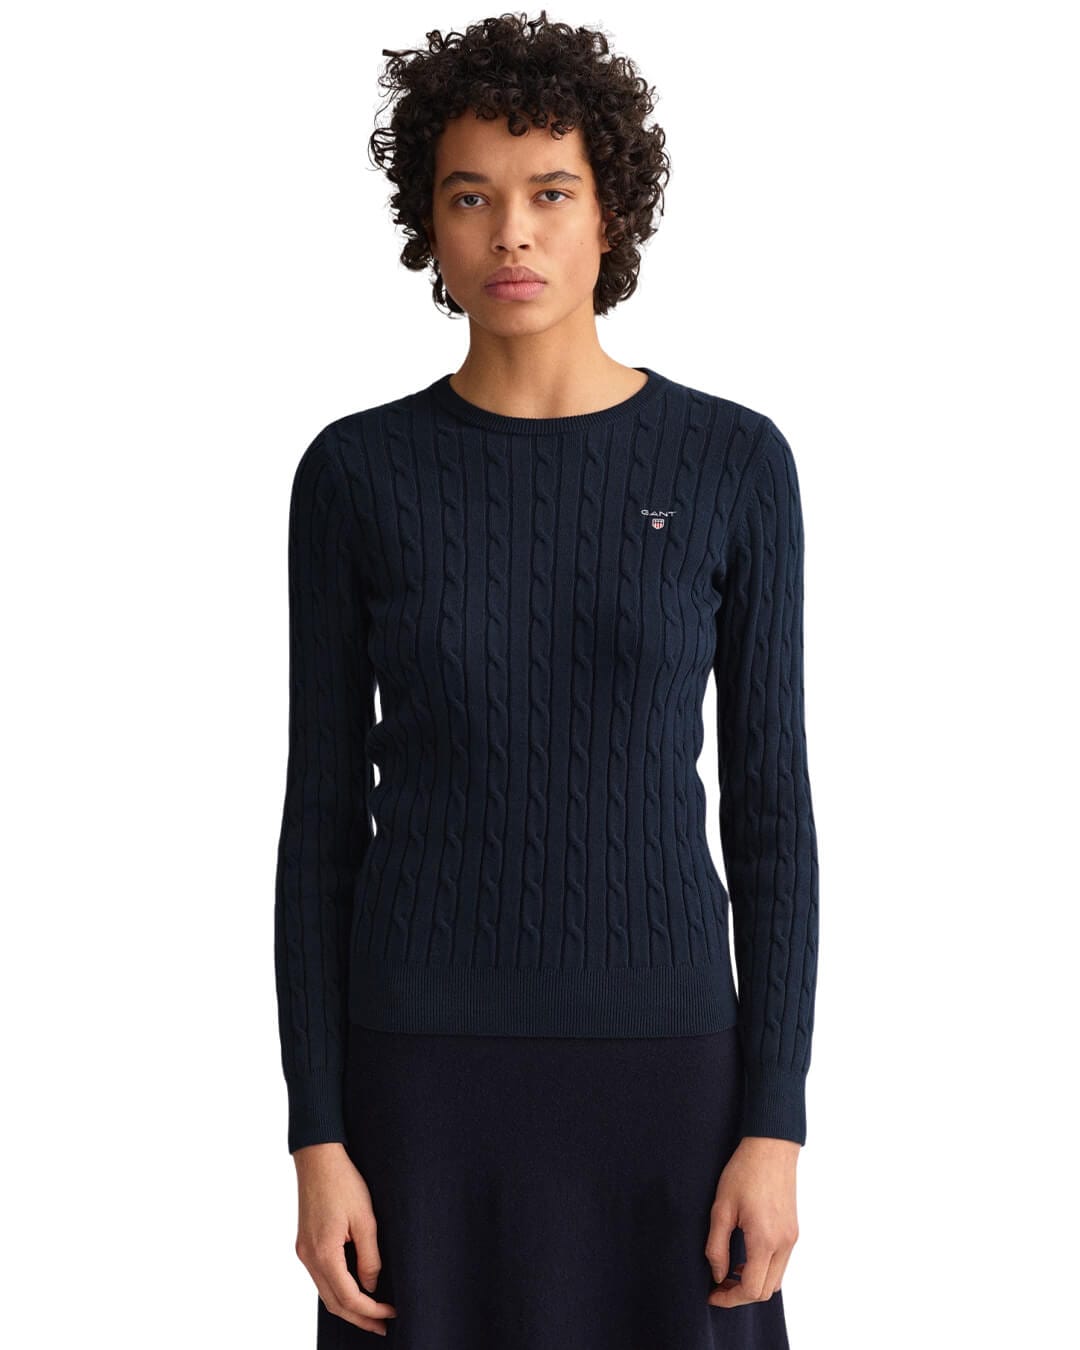 Gant Jumpers Gant Navy Stretch Cotton Cable Knit Crew Neck Sweater